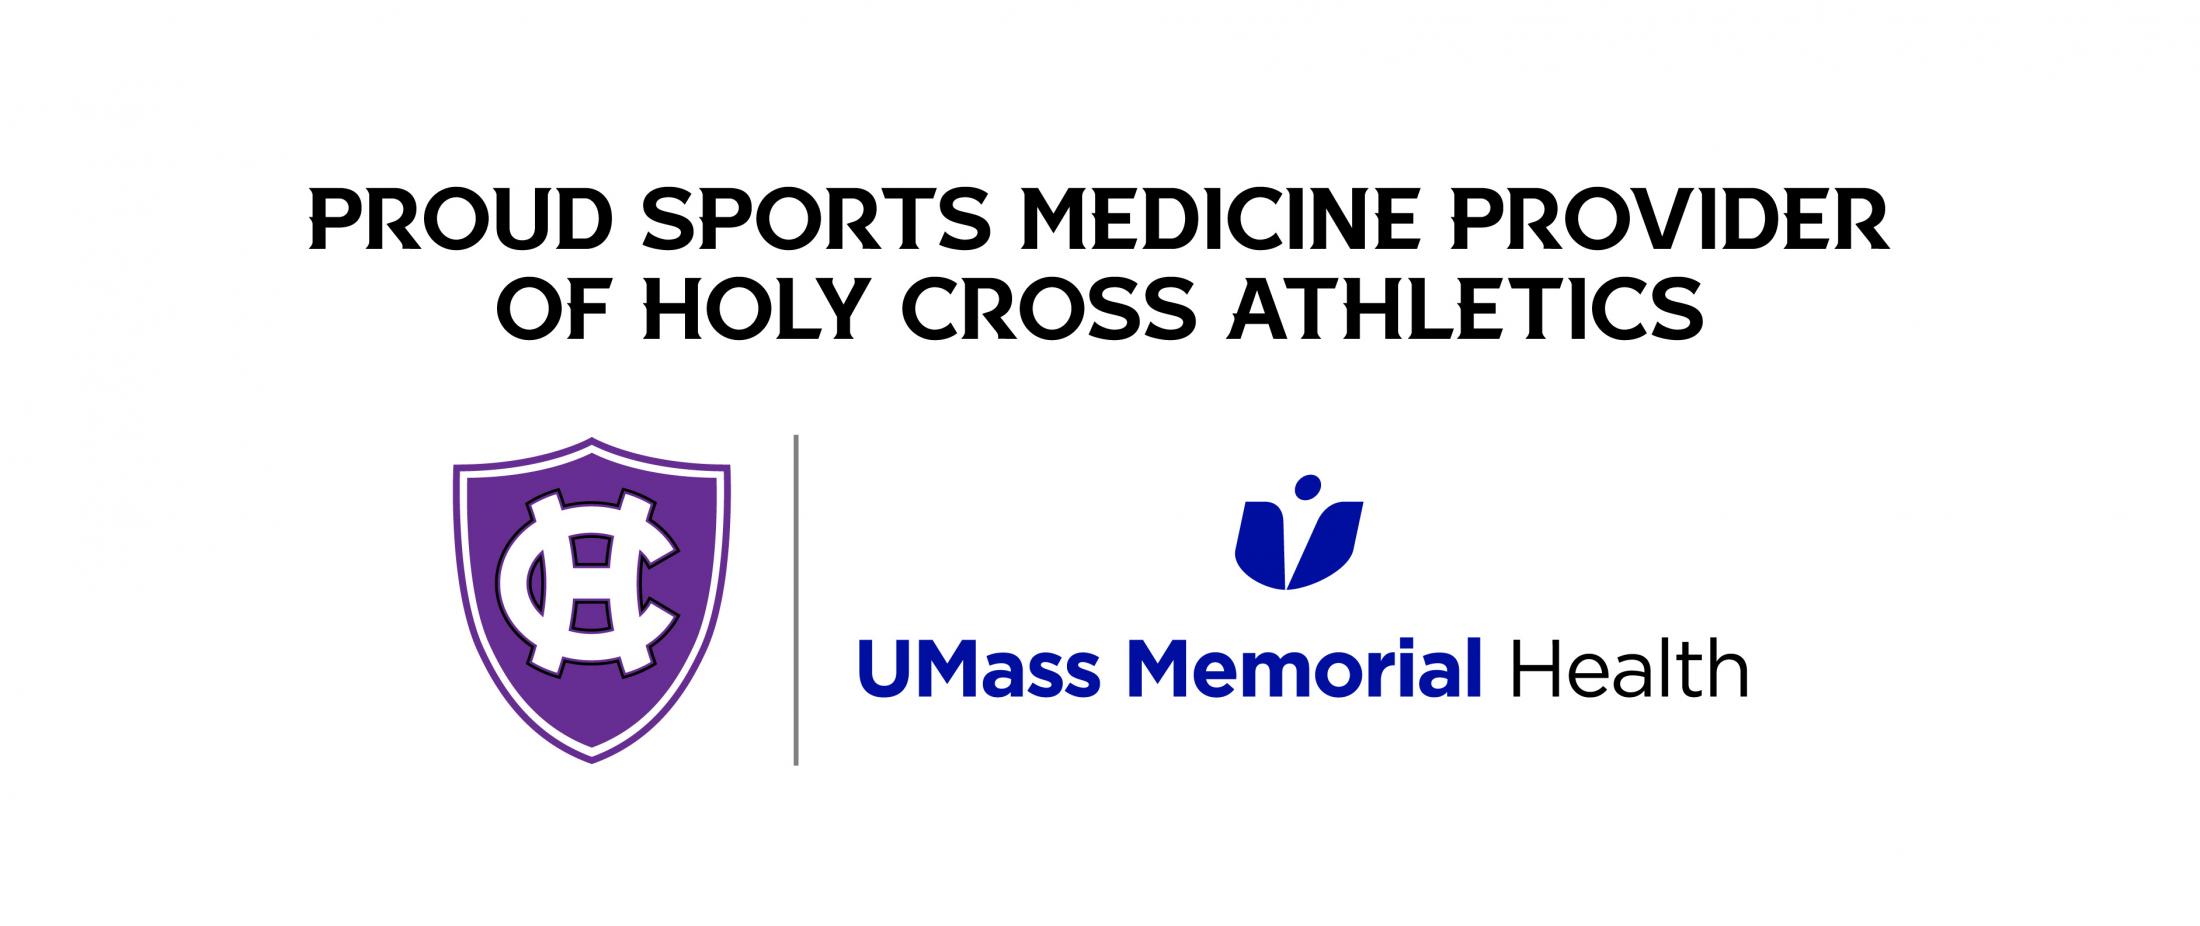 The Holy Cross and UMass Memorial Health logos are shown with the text 'Proud sports medicine provider of Holy Cross Athletics.'